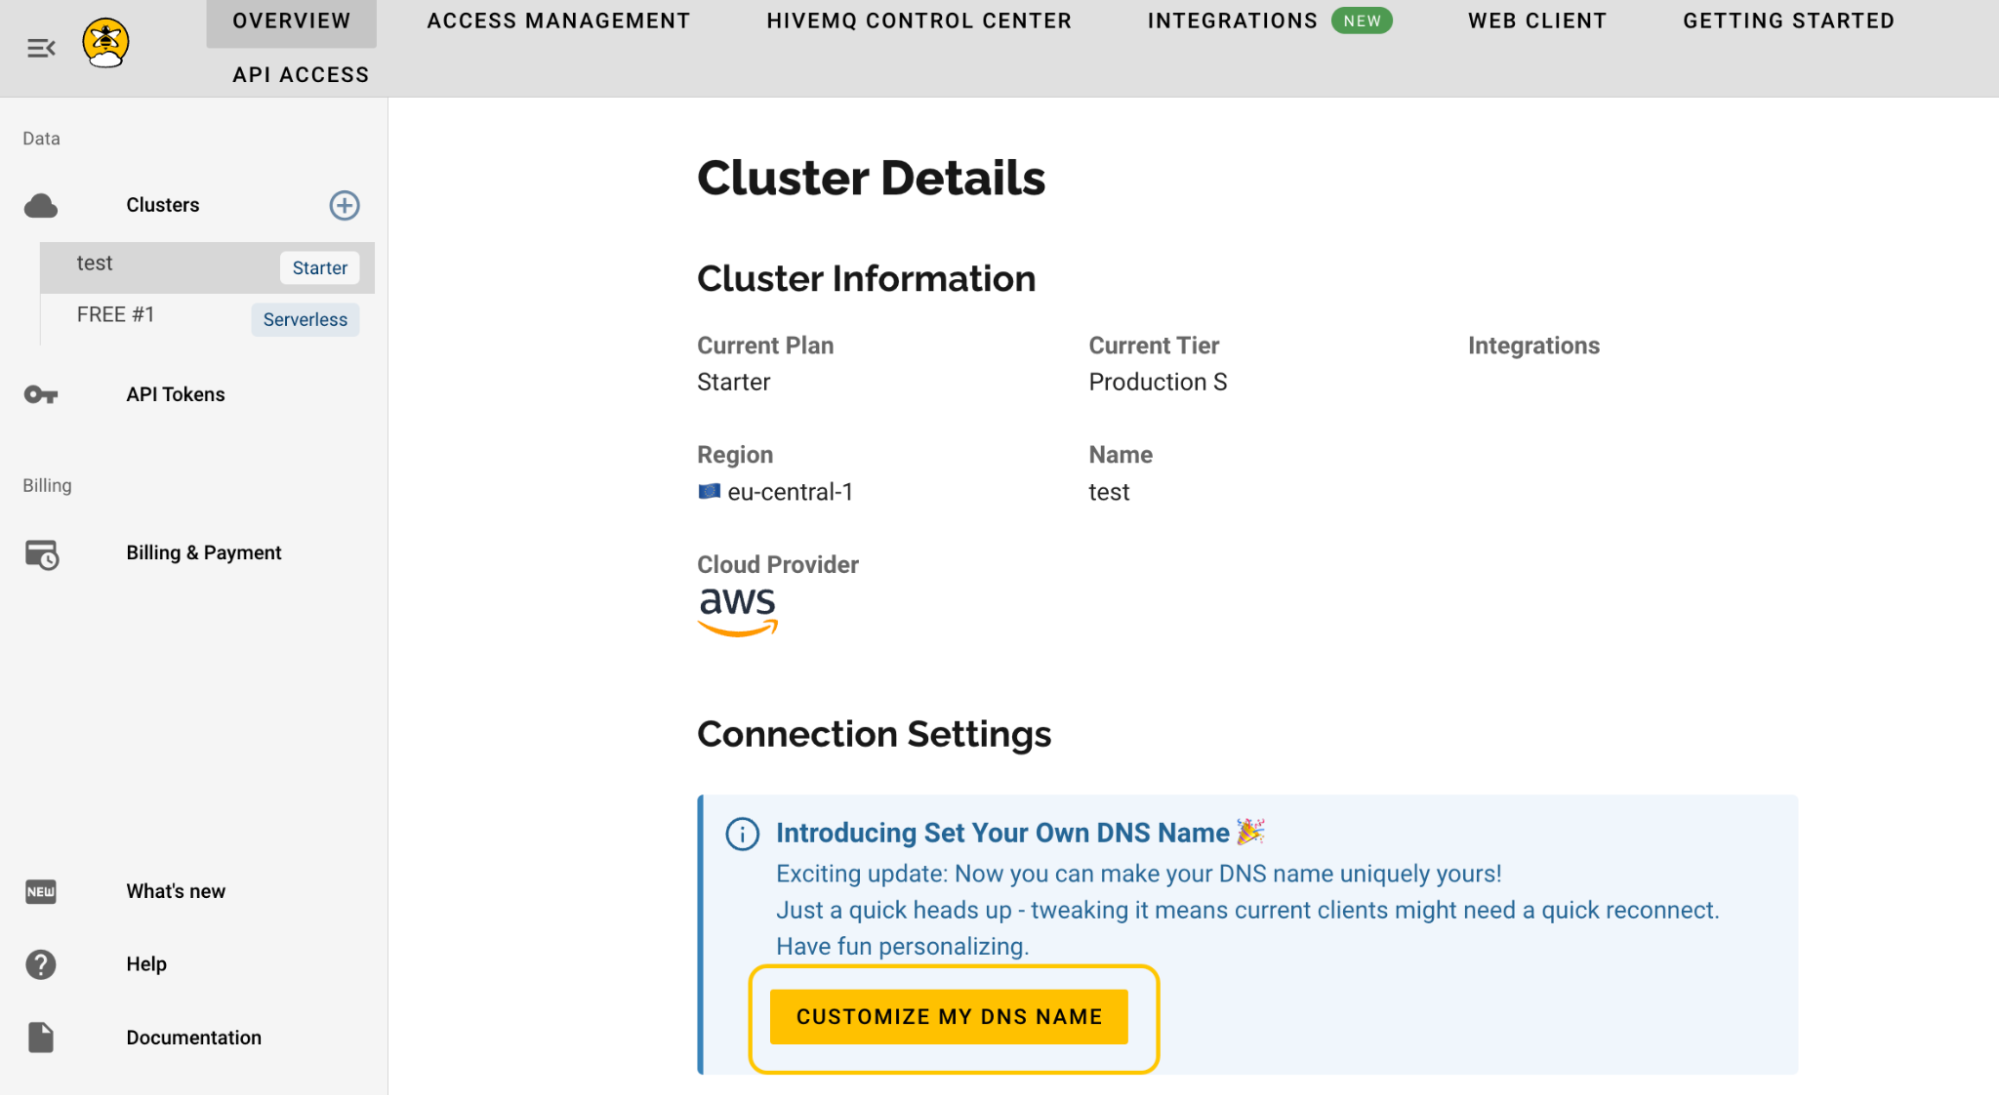 How to access the custom domain name feature in the overview section of your Cloud Starter Cluster?